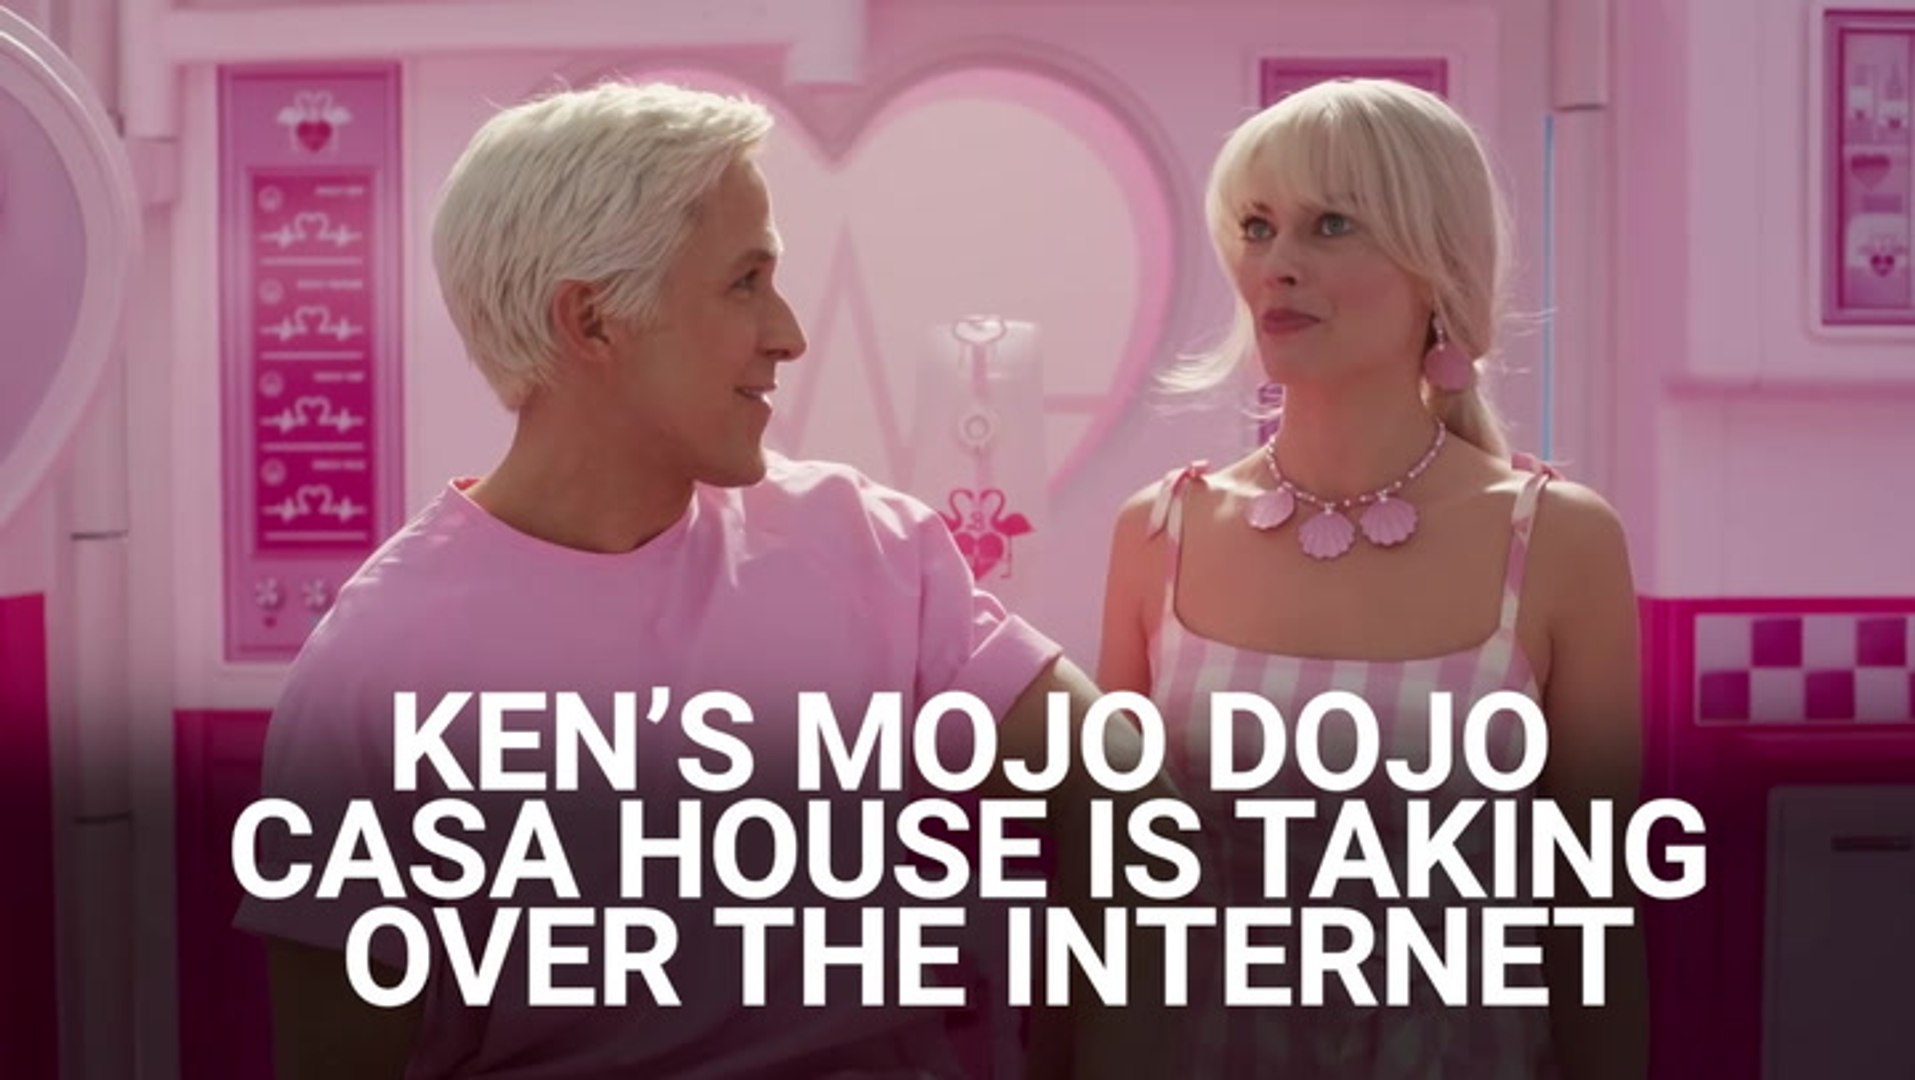 Ken's Mojo Dojo Casa House From 'Barbie' Is Taking Over The Internet, And  We Can't Stop Laughing About It - video Dailymotion